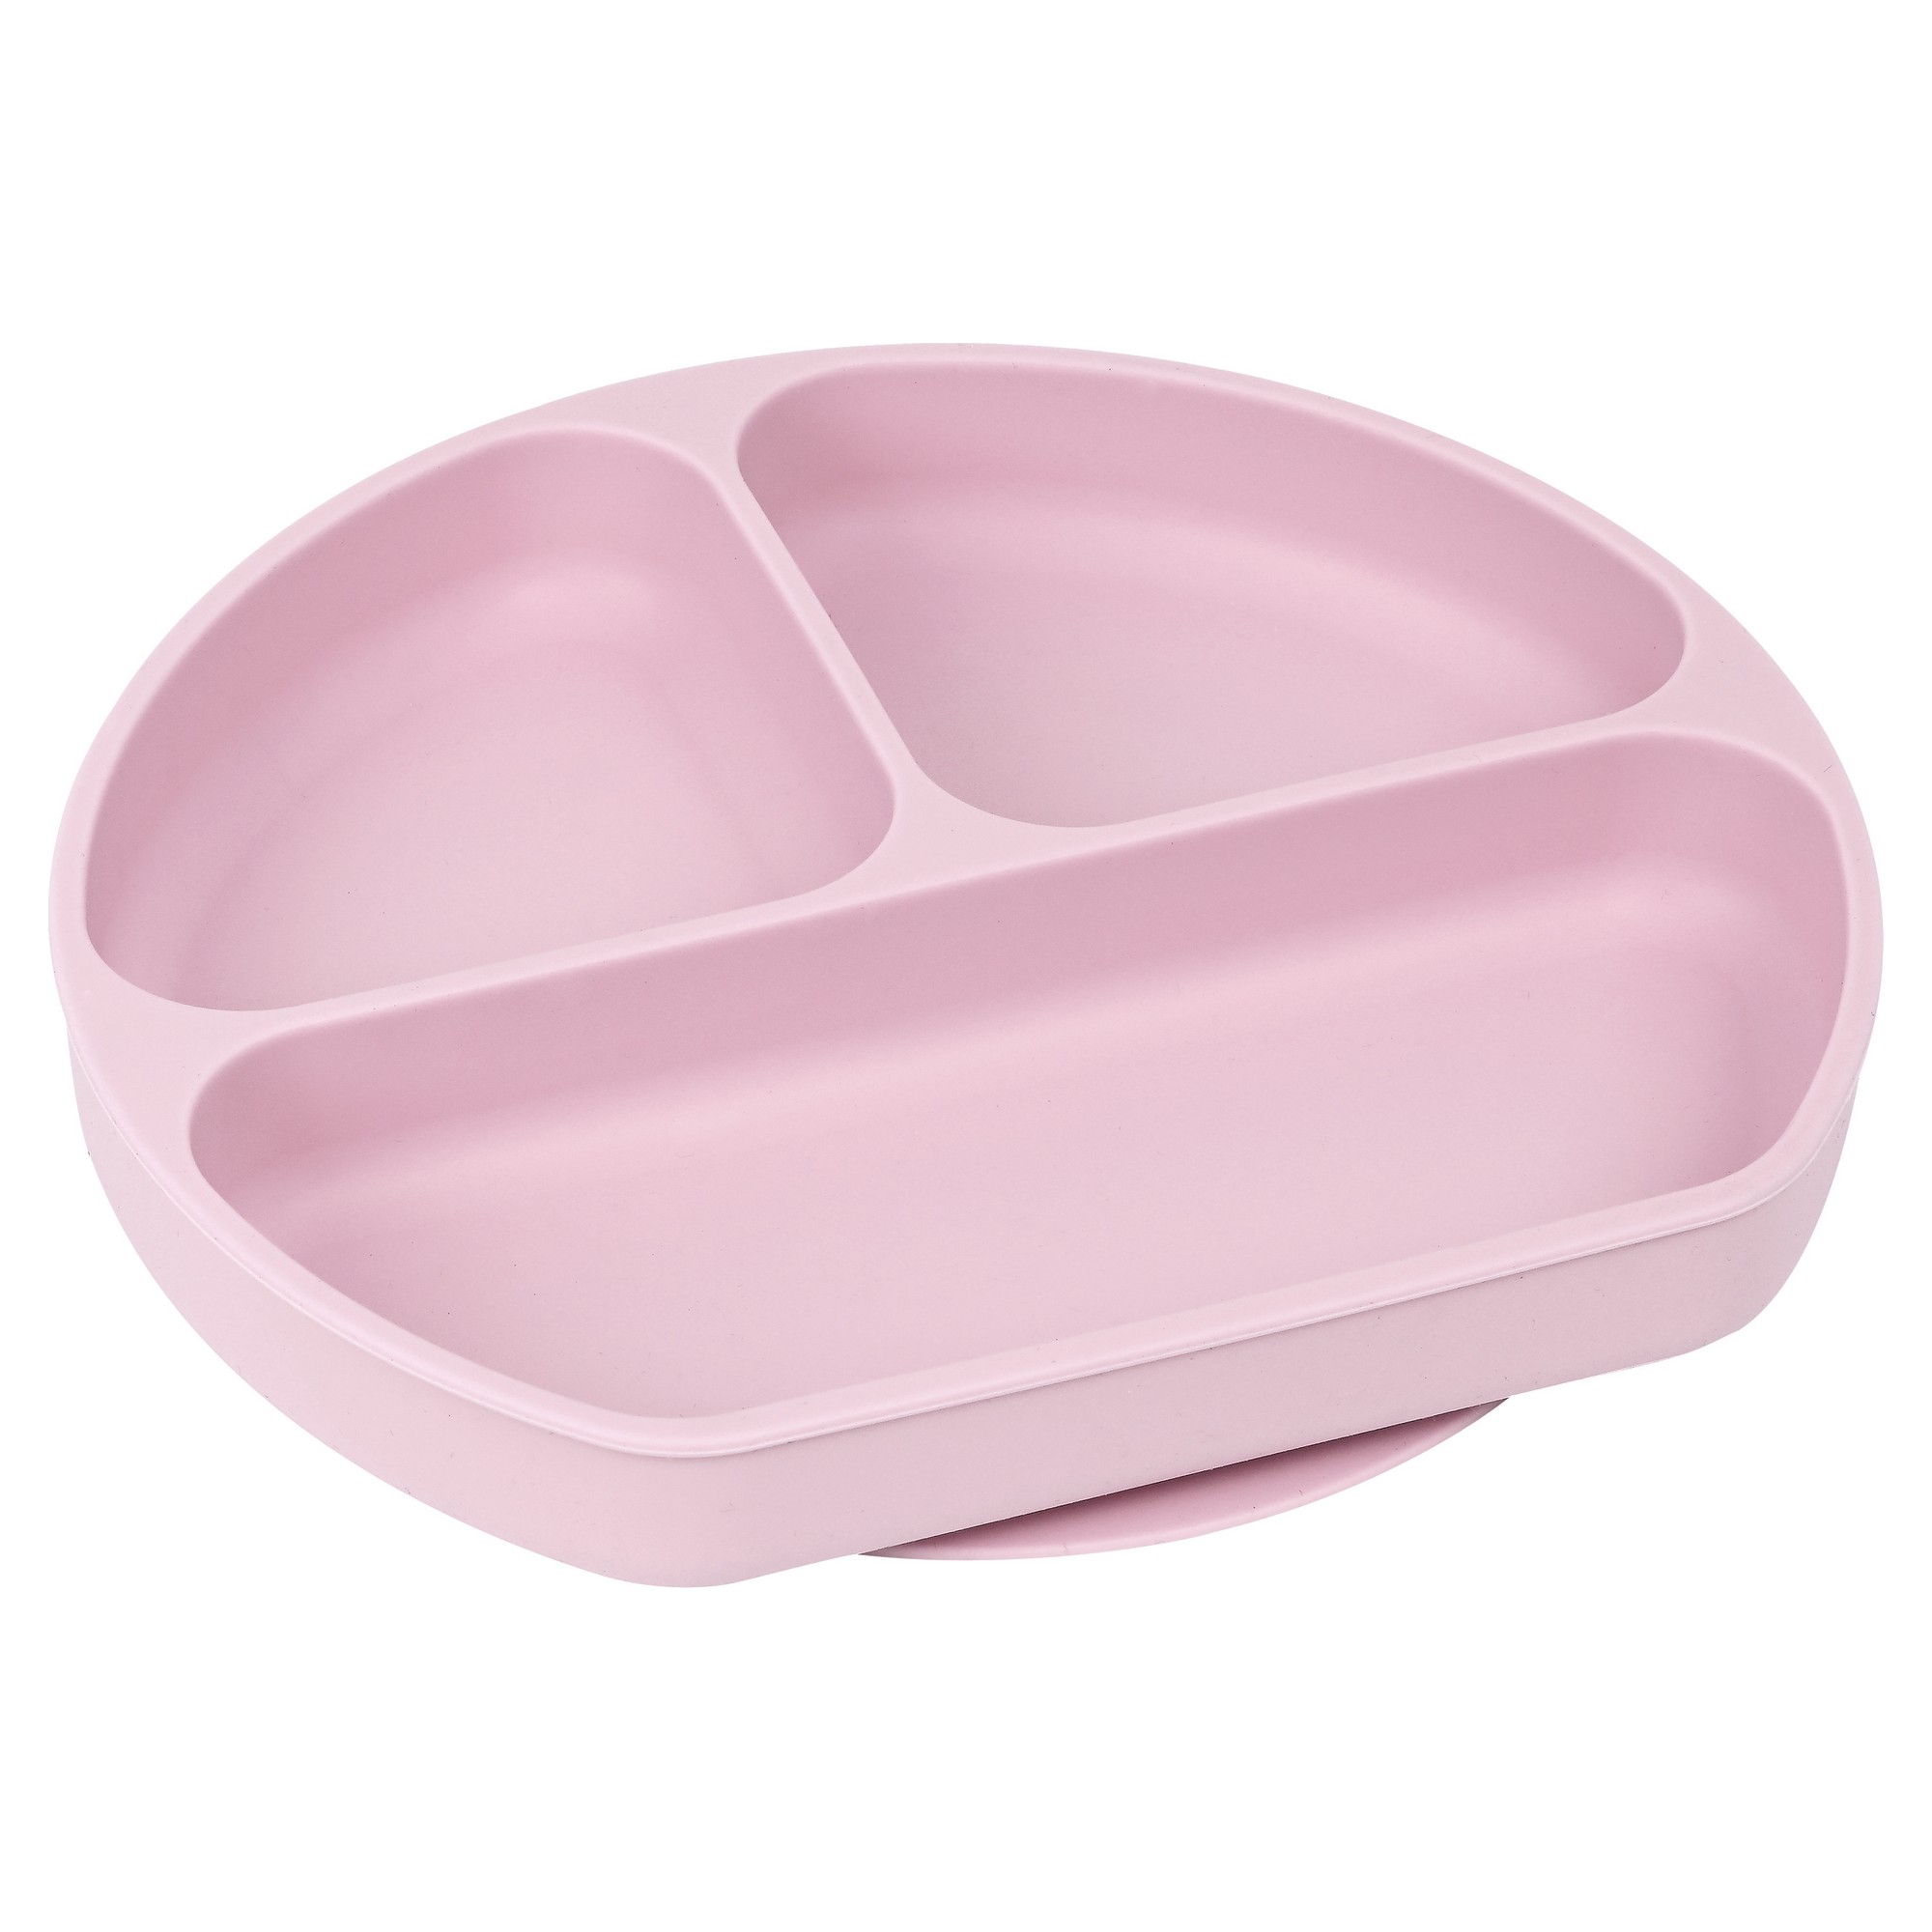 Plate Safta Koala Silicone Suction cup Pink (20,5 x 2,5 x 18 cm)